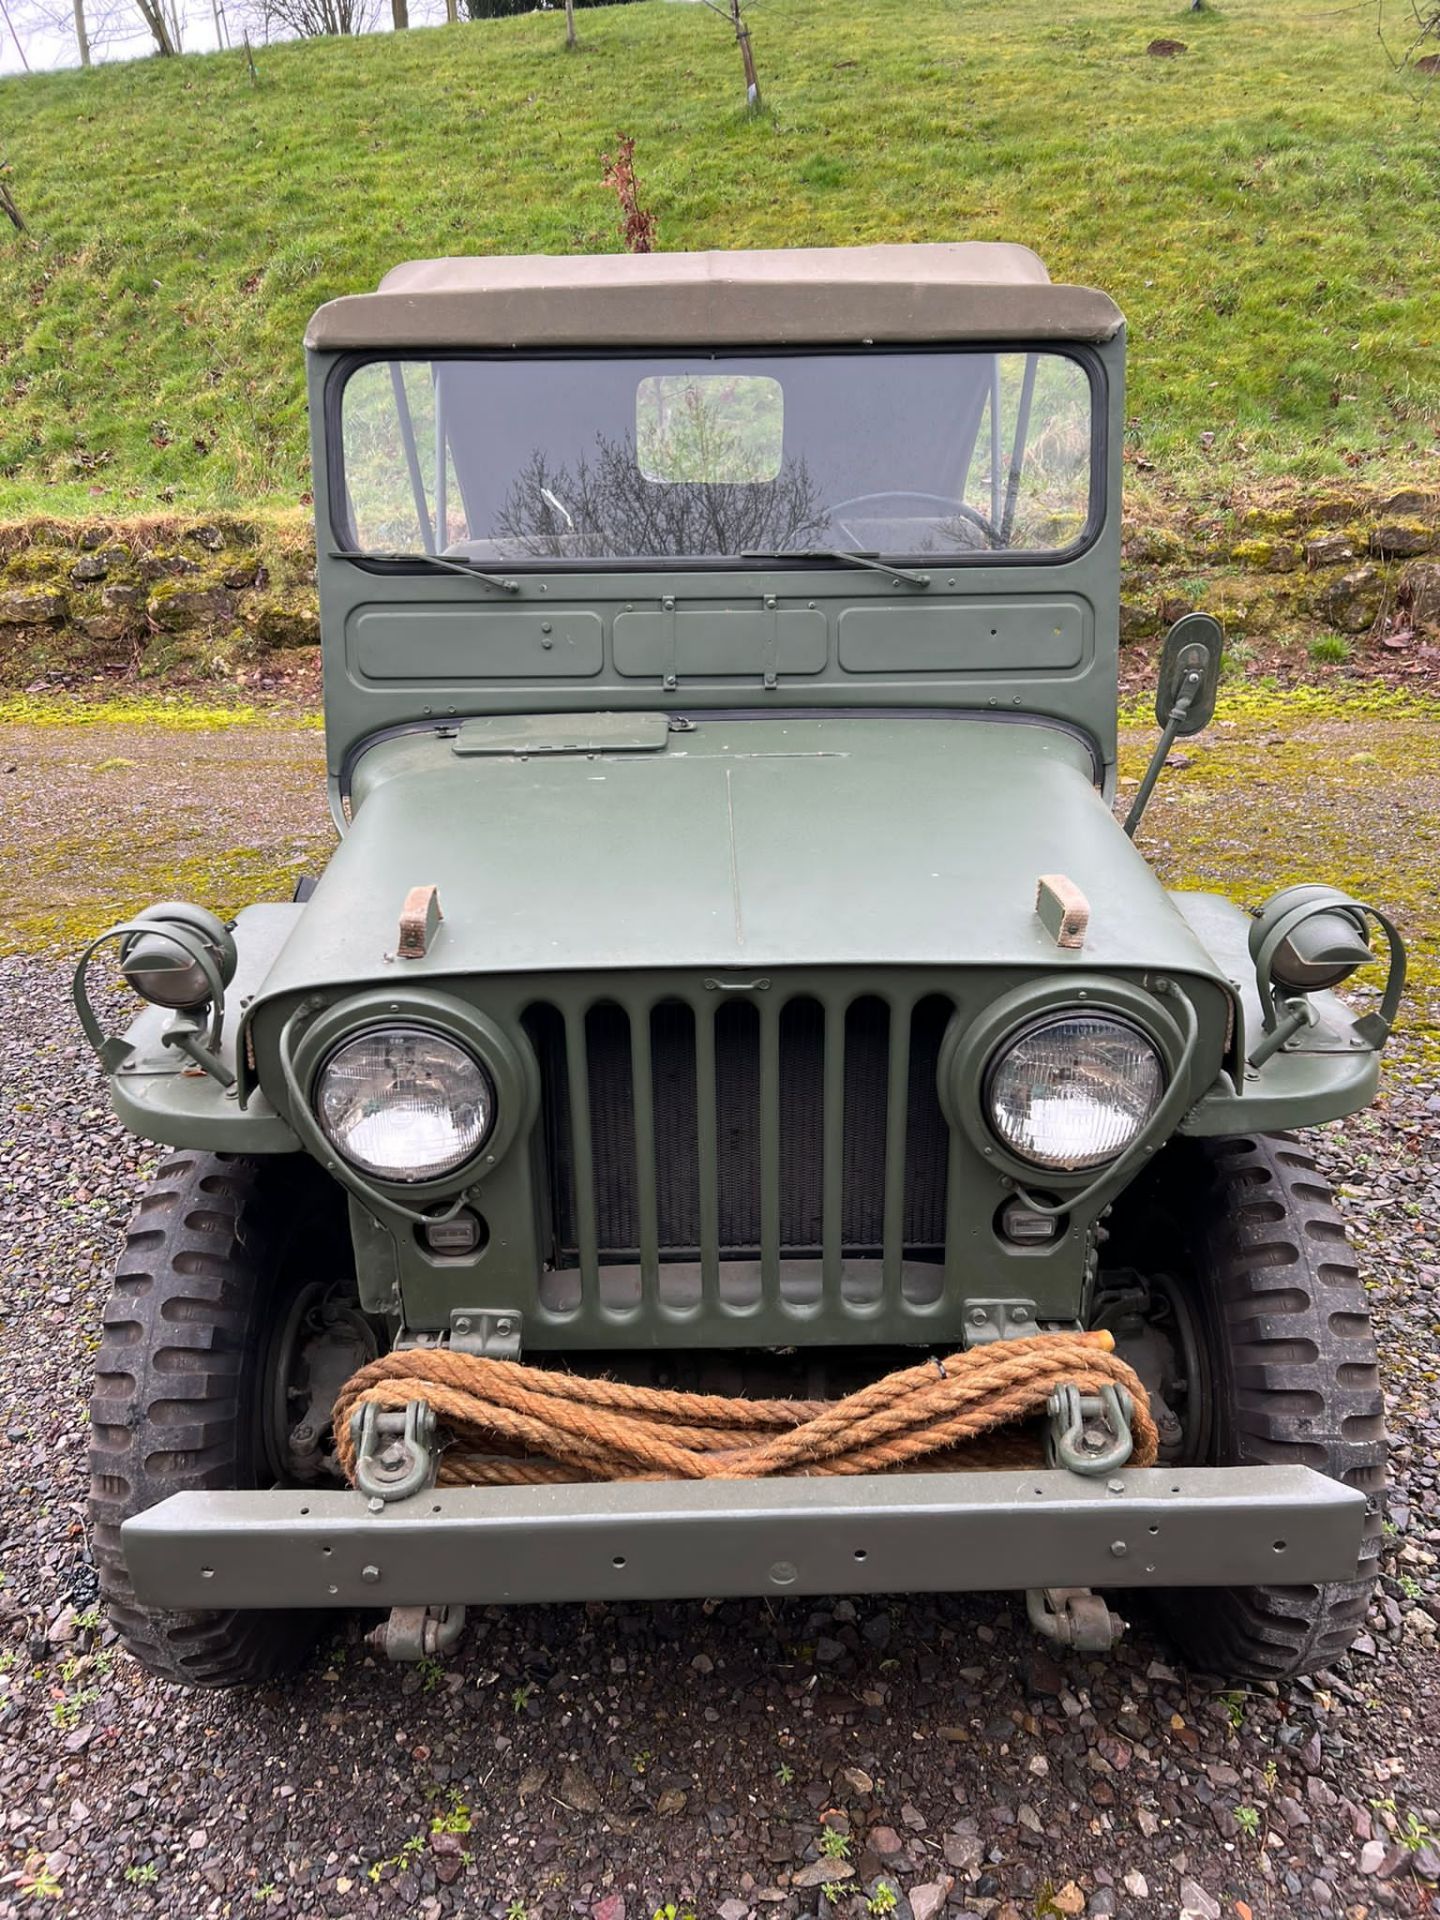 Willys Jeep Model M38 c1947 - Image 7 of 13